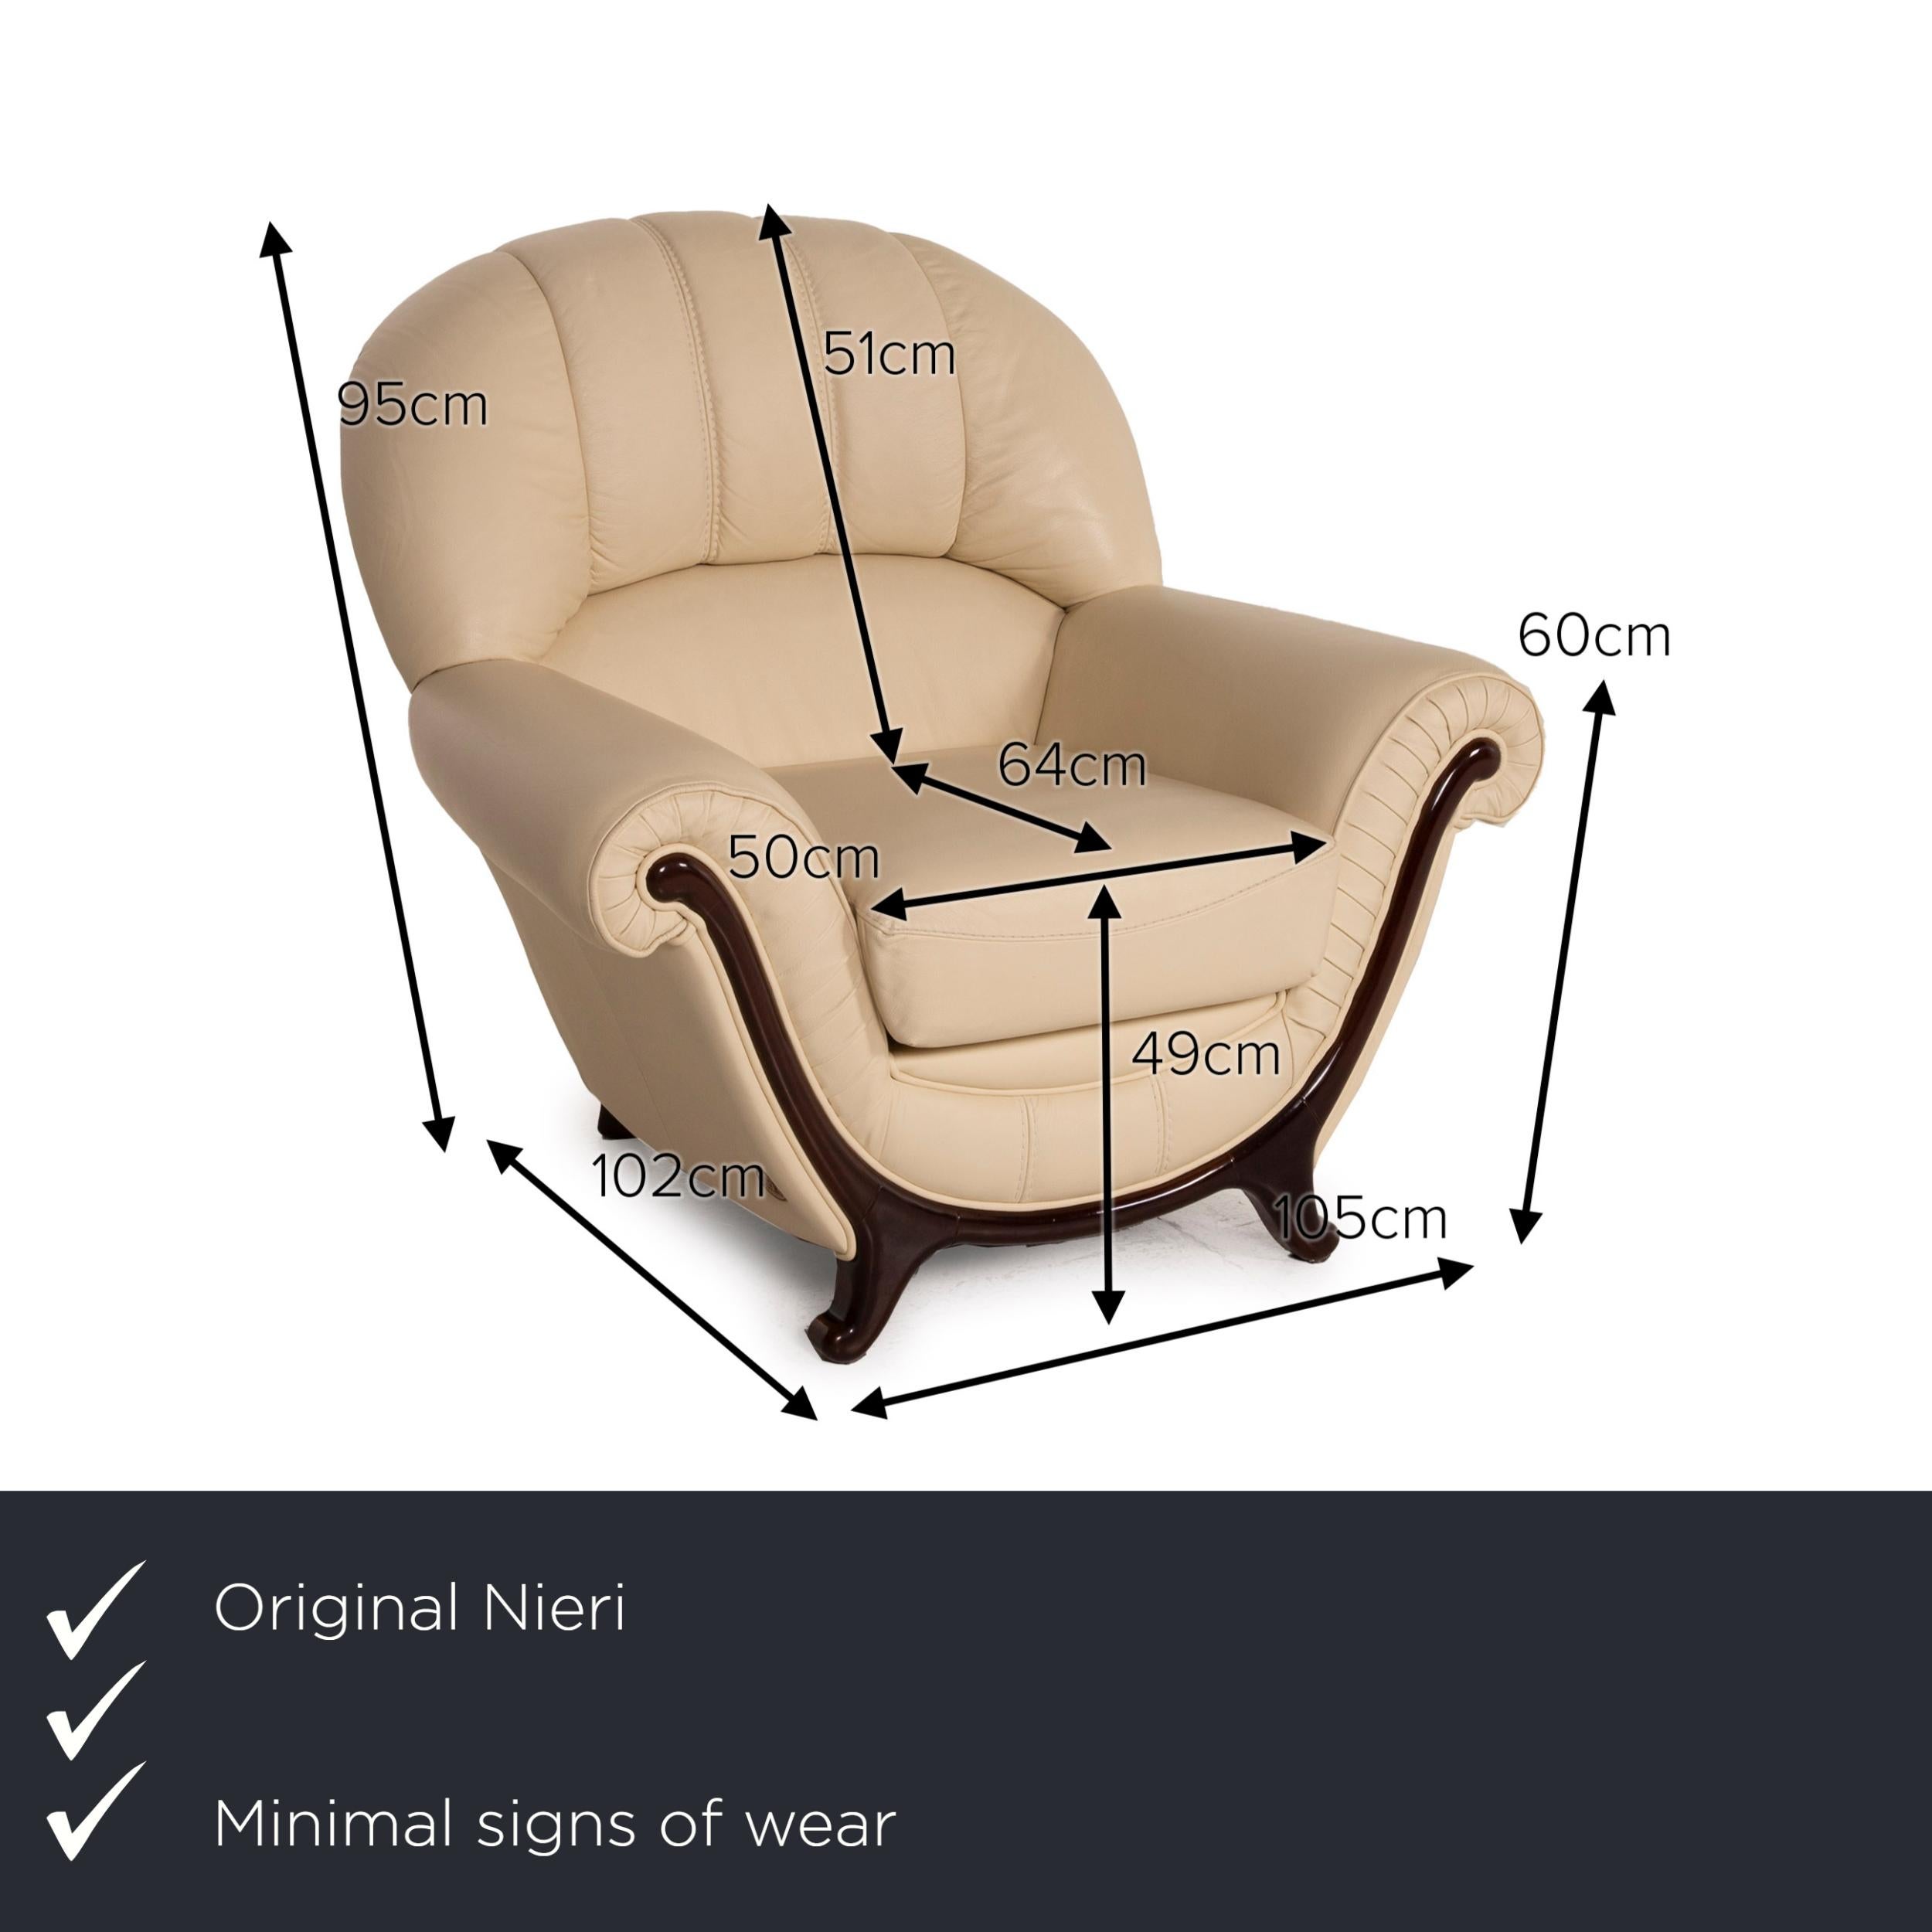 We present to you a Nieri leather armchair cream wood.

Product measurements in centimeters:

Depth 102
Width 105
Height 95
Seat height 49
Rest height 60
Seat depth 64
Seat width 50
Back height 51.
 
 
  